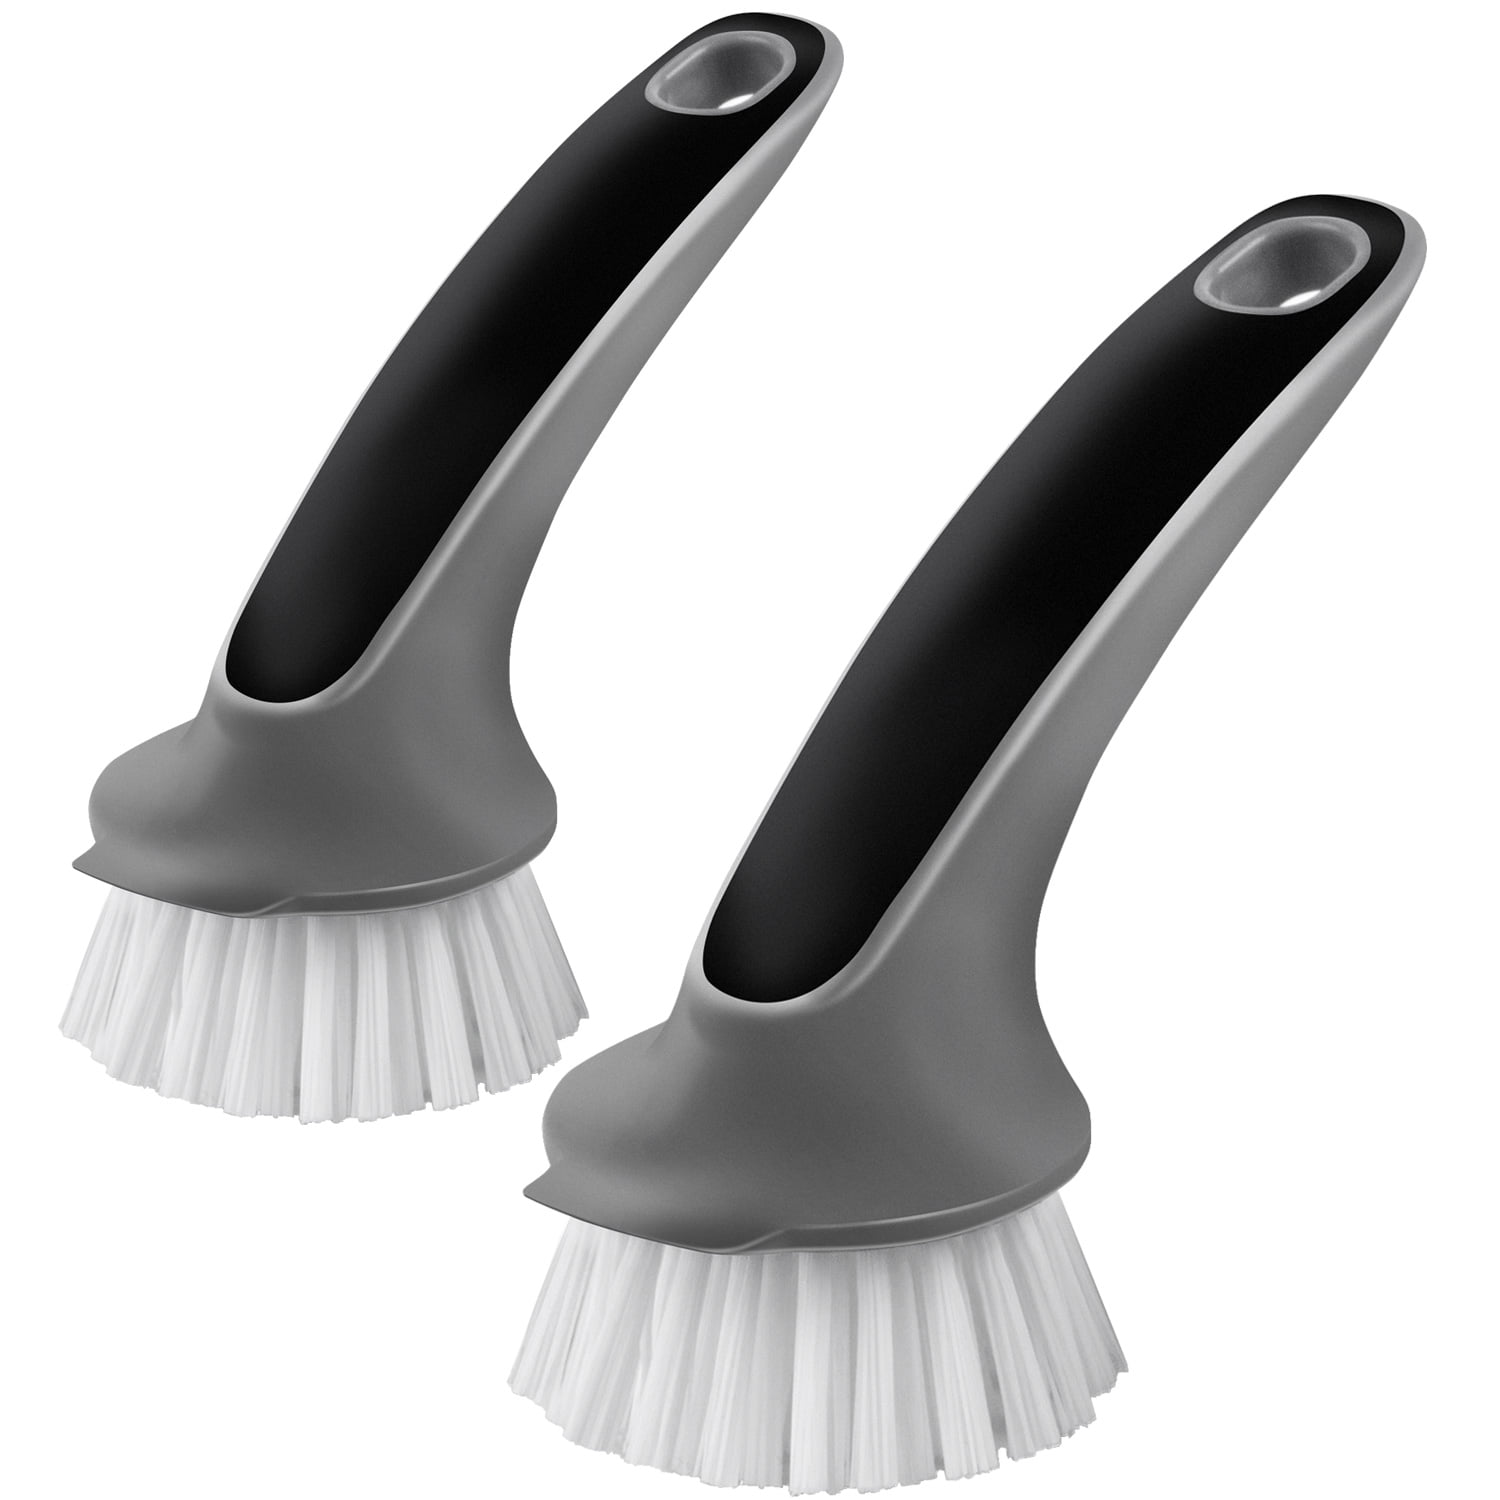 2-Pack Dish Brush, Fapazee Dish Scrubber Brush with Handle, Kitchen Scrub  Brush Suitable for Dishes Pans Pots Sink Cleaning